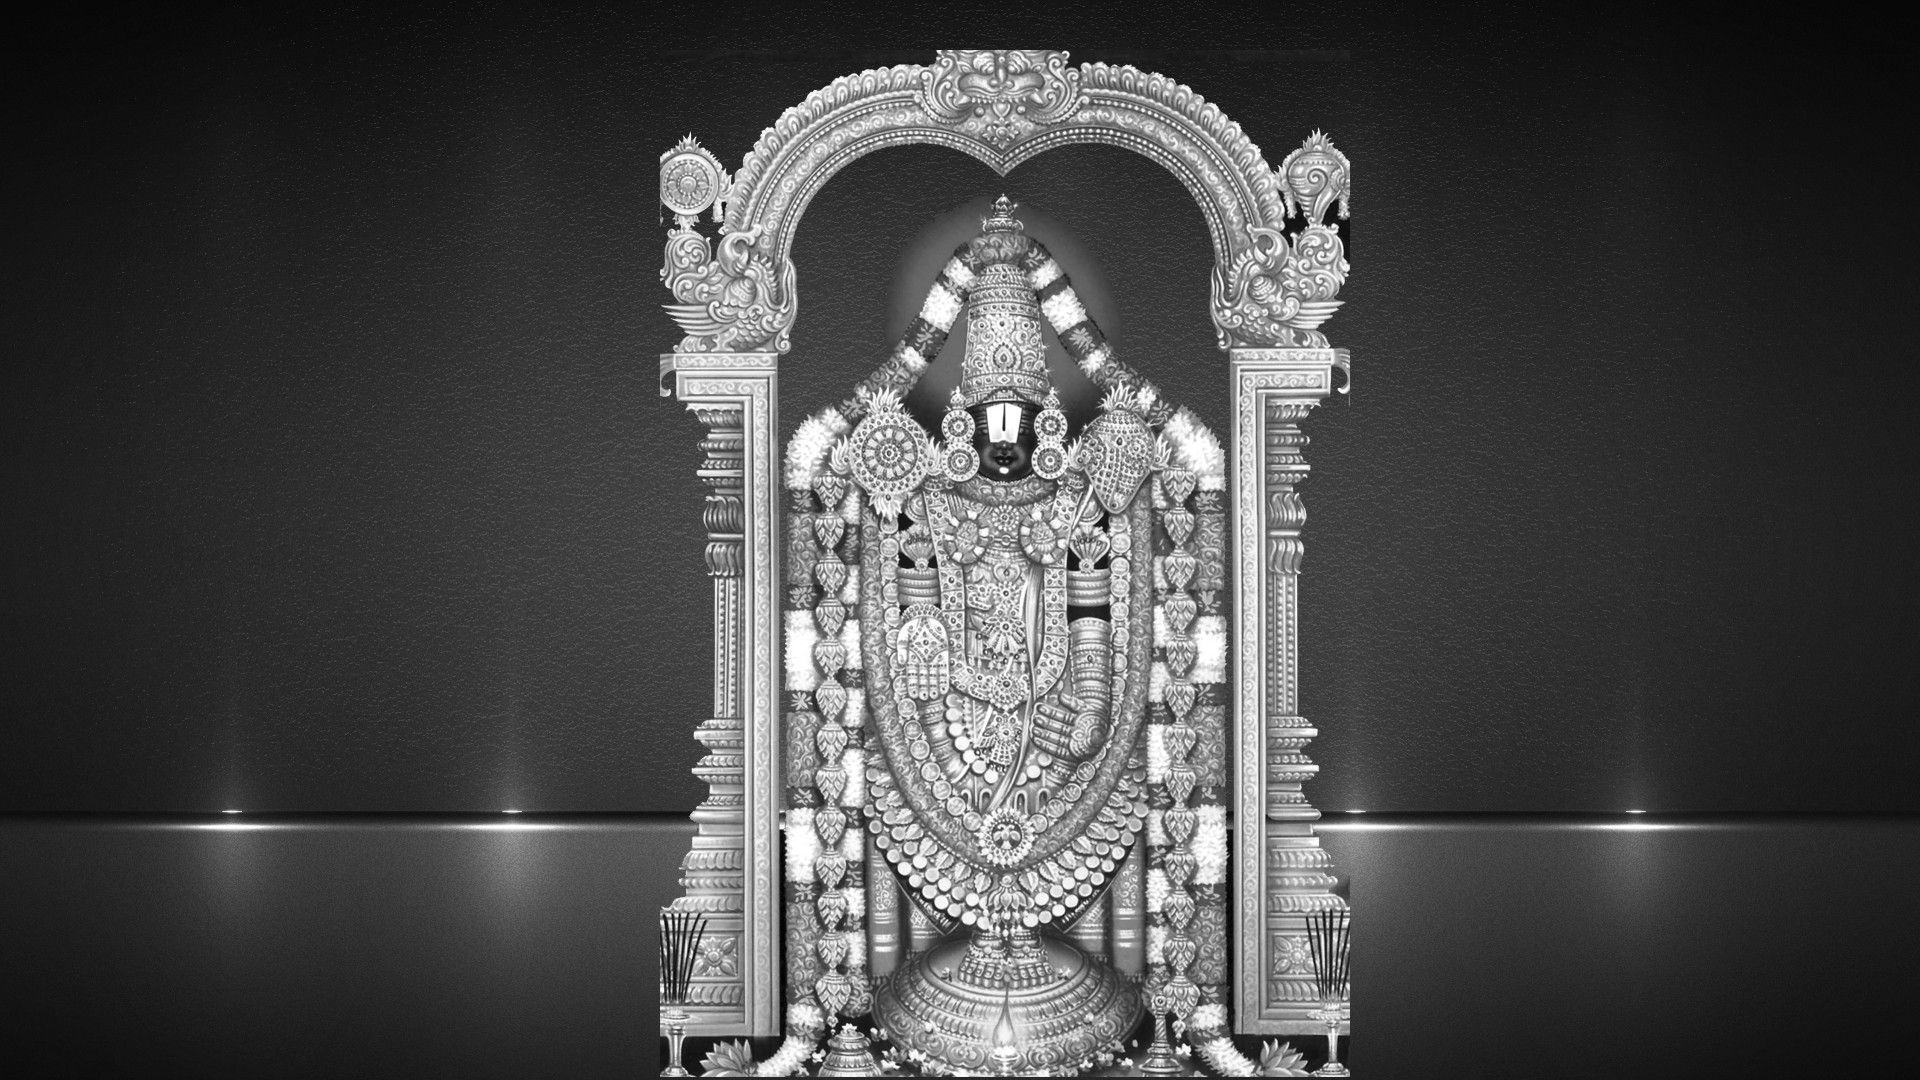 Lord balaji wallpapers, photos, pictures & images for desktop